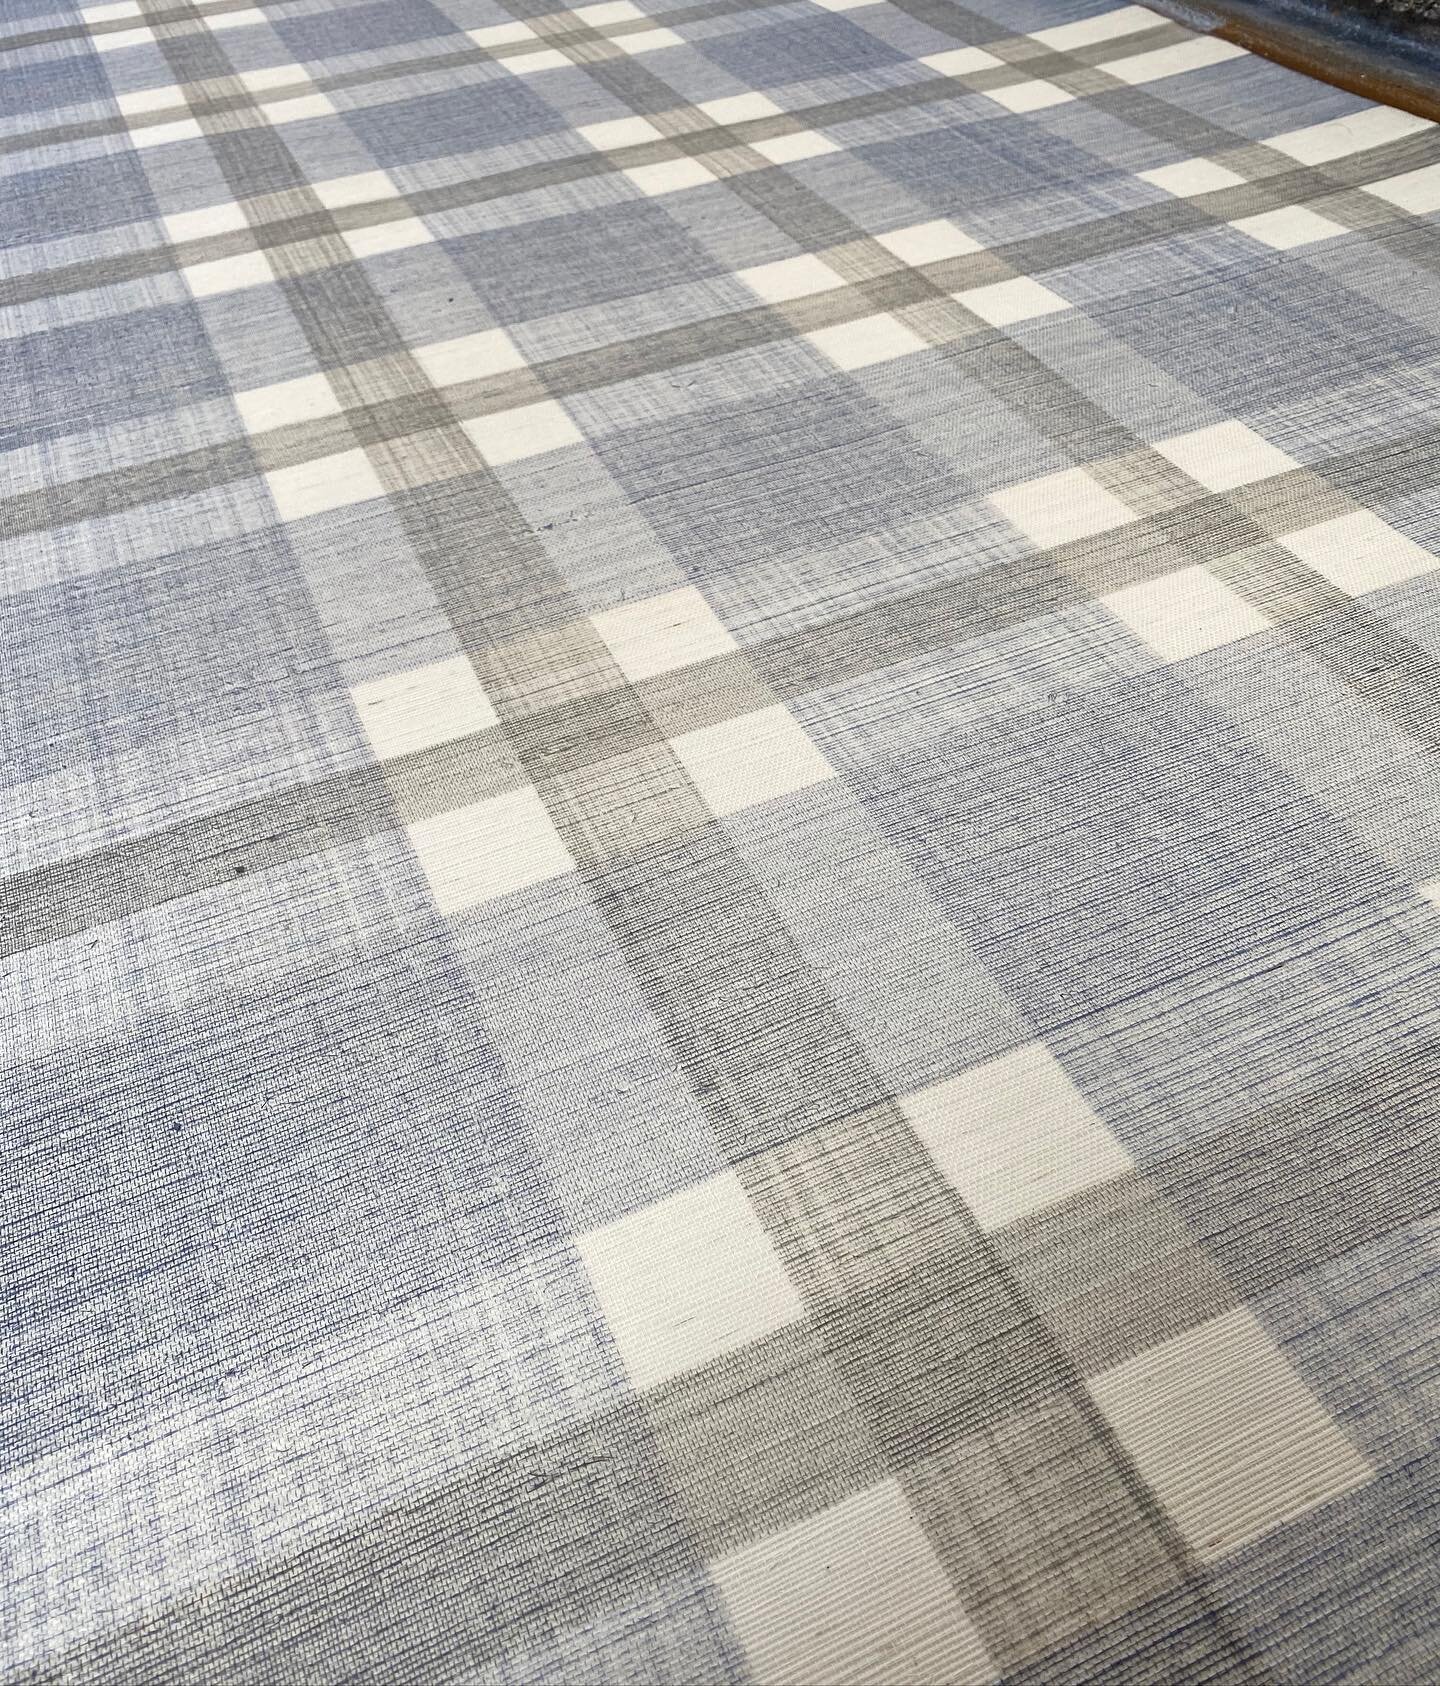 Our Tartan hand painted Grasscloth in color TR-2 Hampton. Custom is our specialty! #luxurywallpaper #handpaintedwallpaper #printed grasscloth #grasscloth #customwallpaper